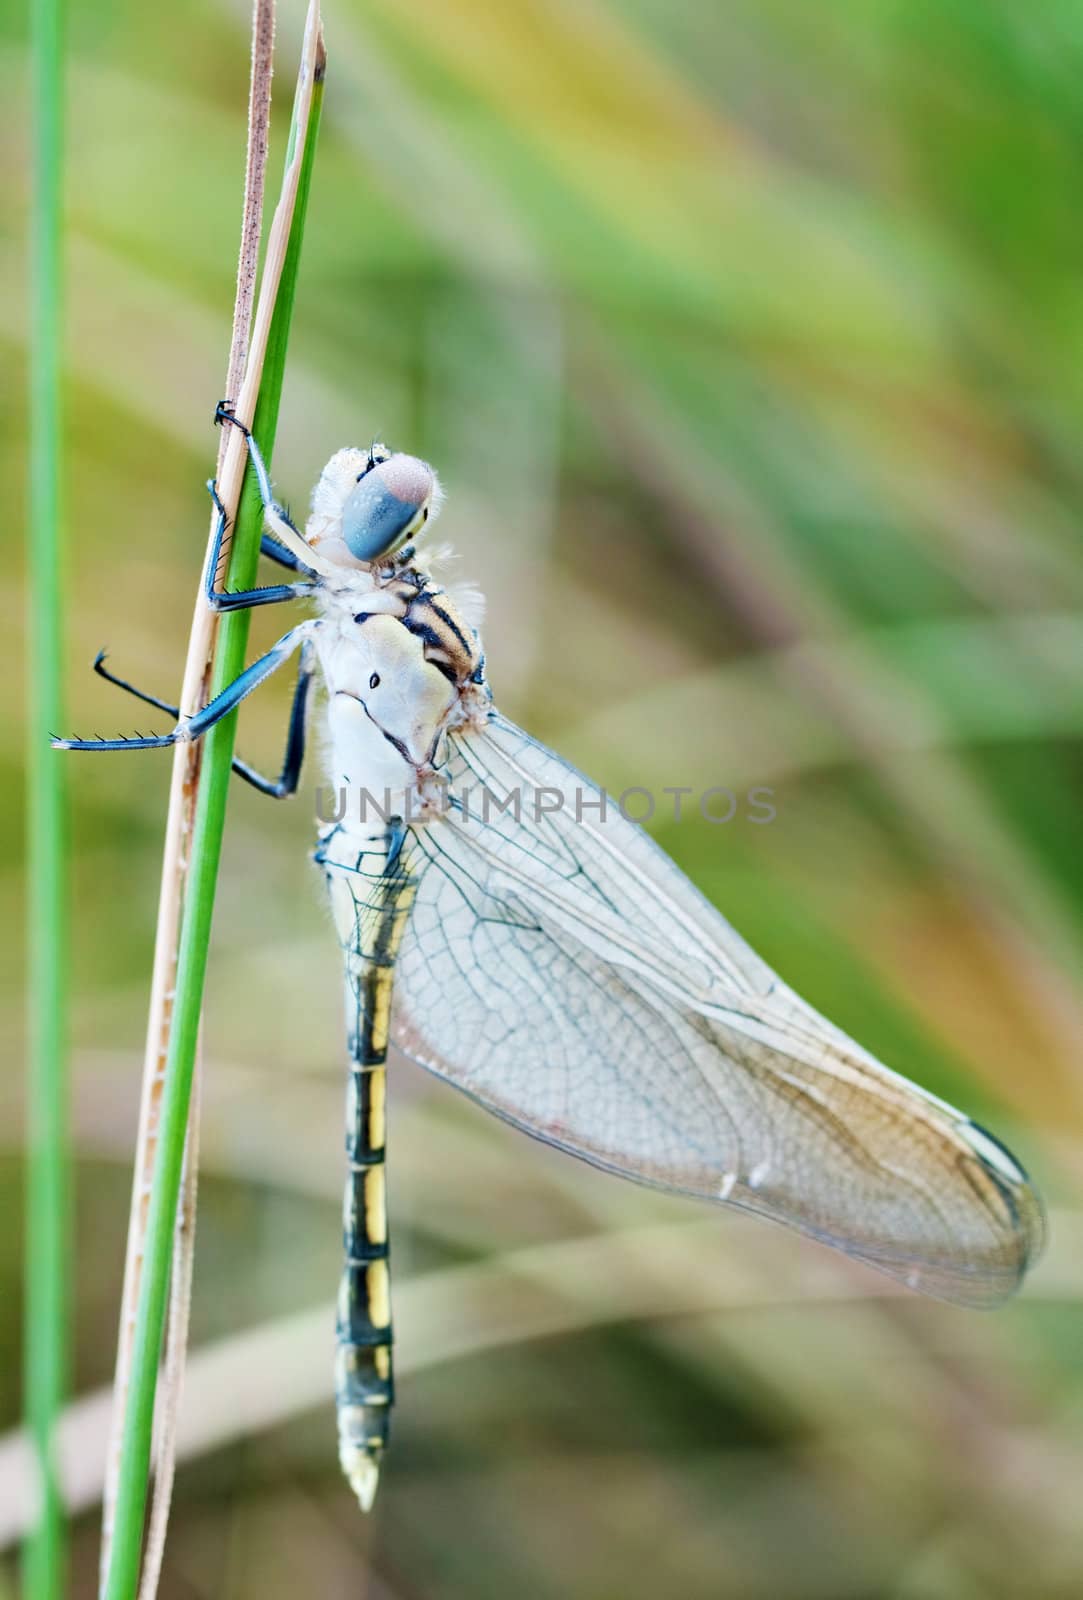 young dragonfly by clearviewstock